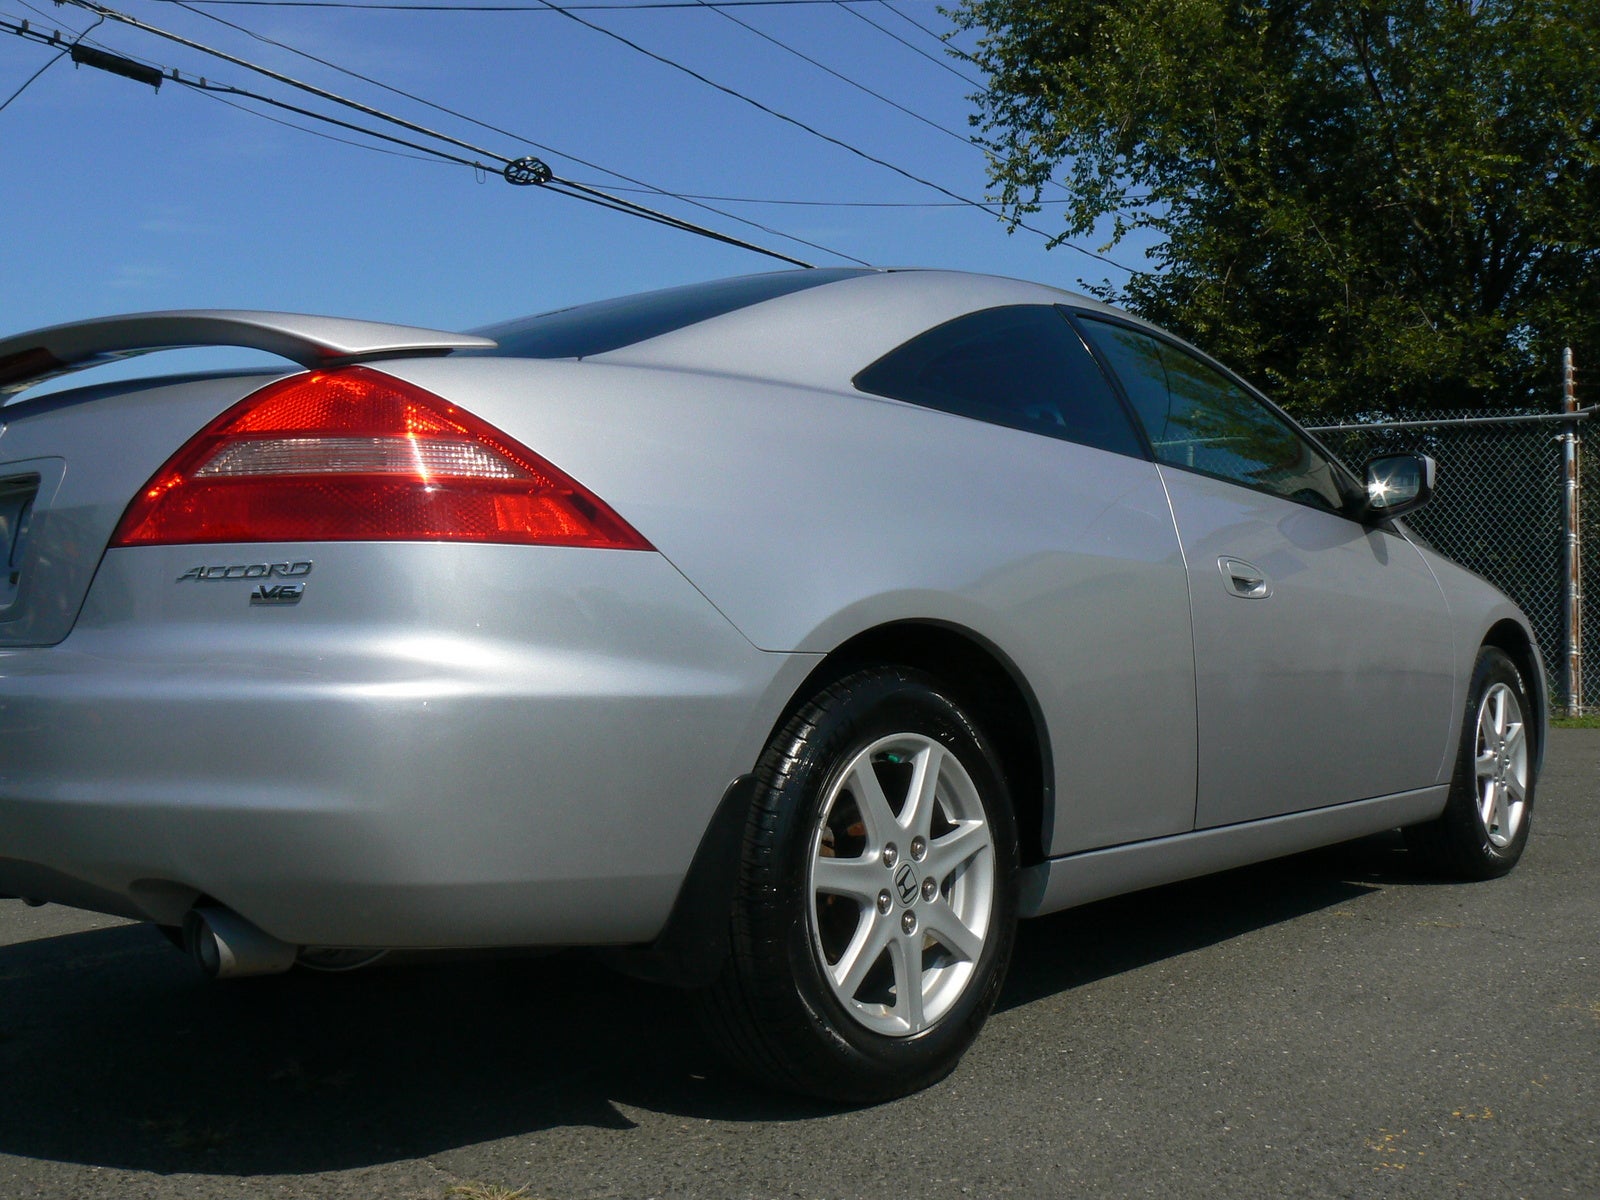 2003 Honda accord ex coupe review